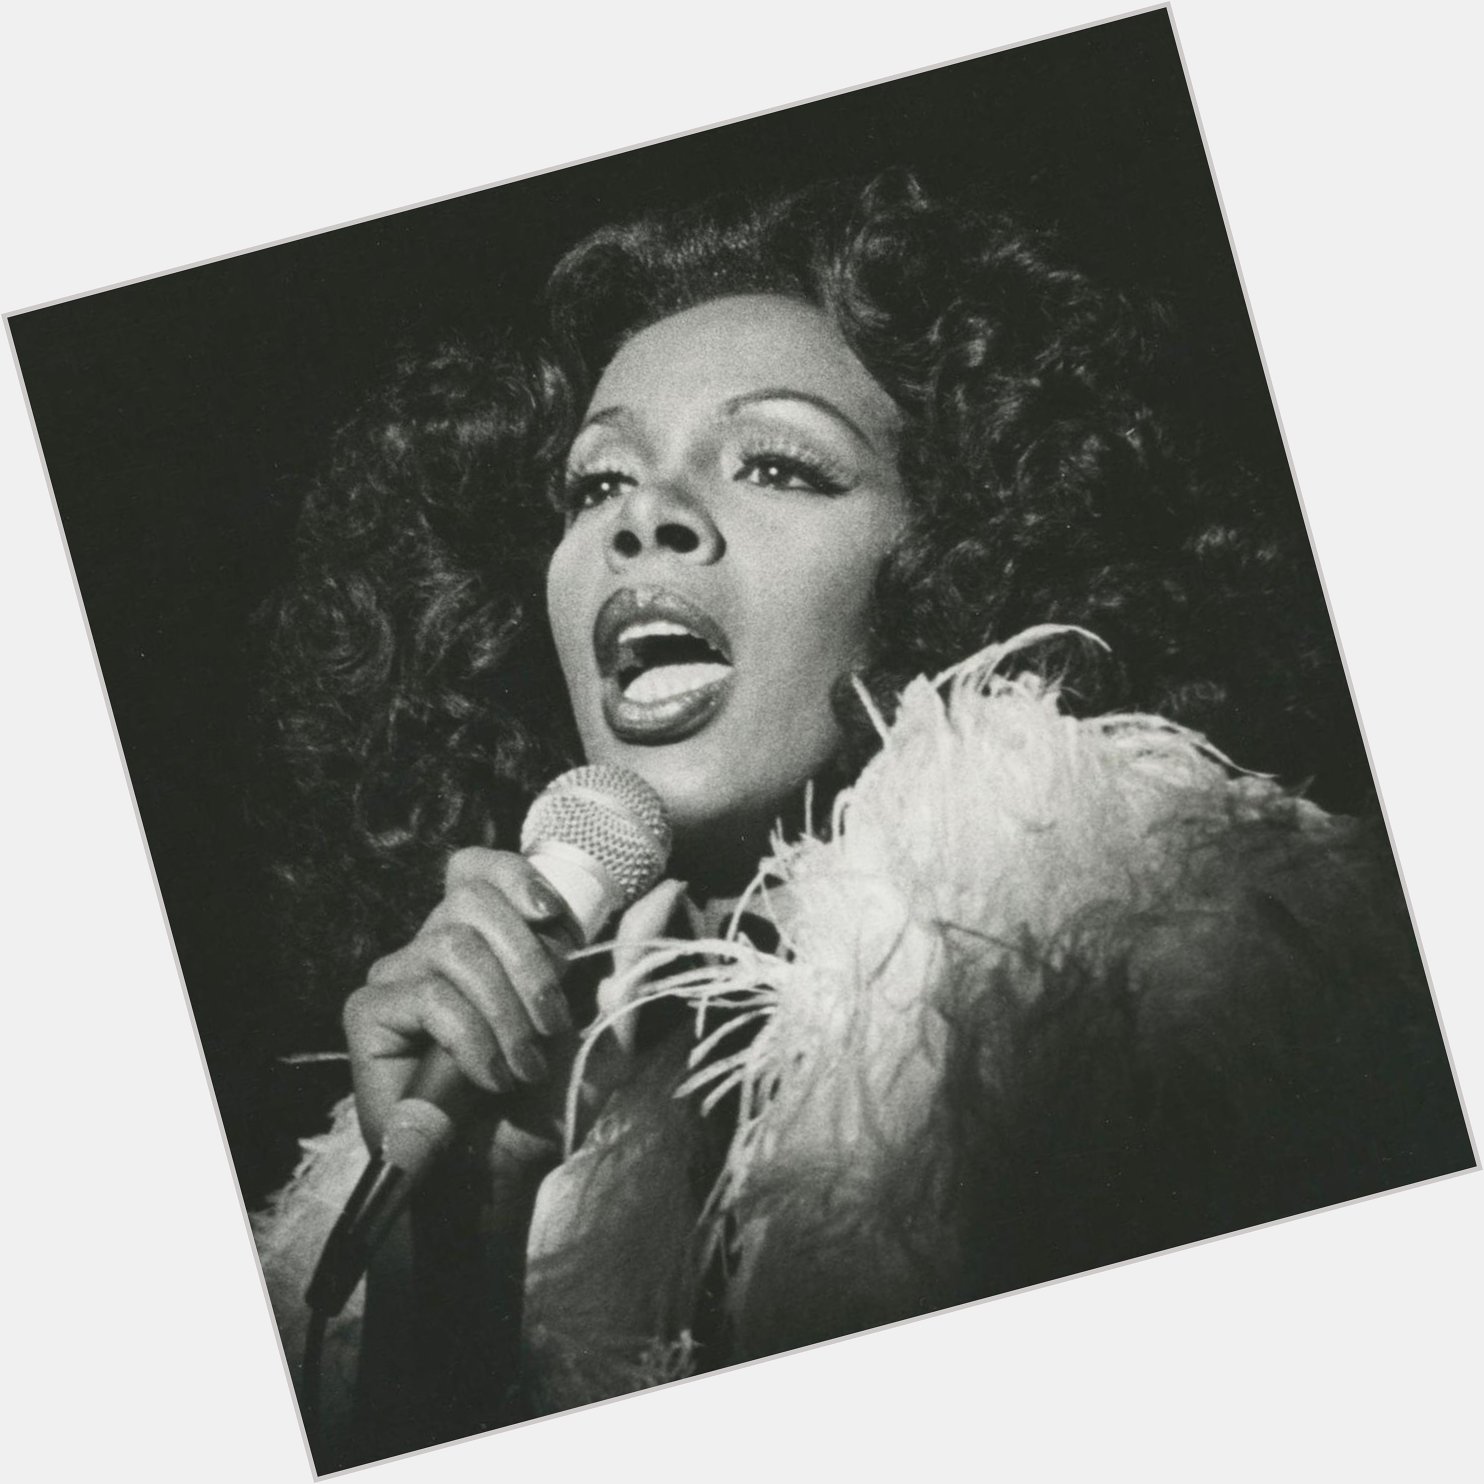 Happy Birthday to the late great Donna Summer, as she would have been 74 today. RIP. 